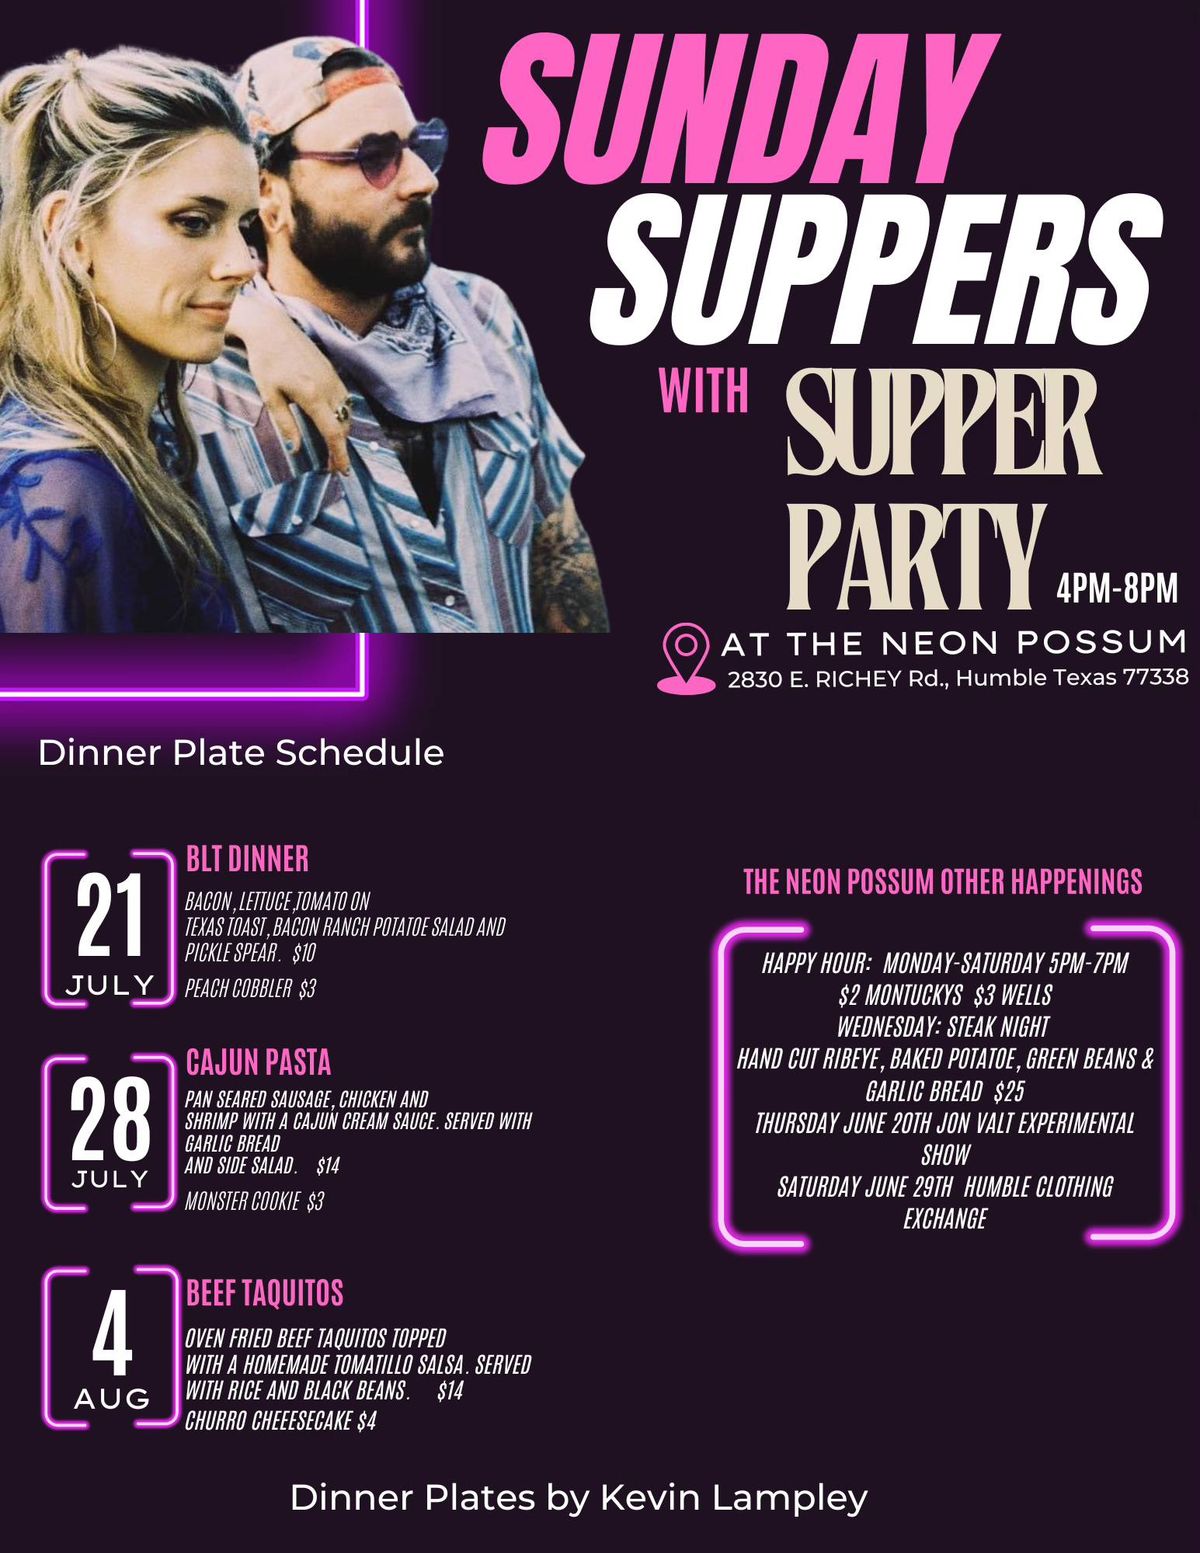 Sunday Supper with Supper Party